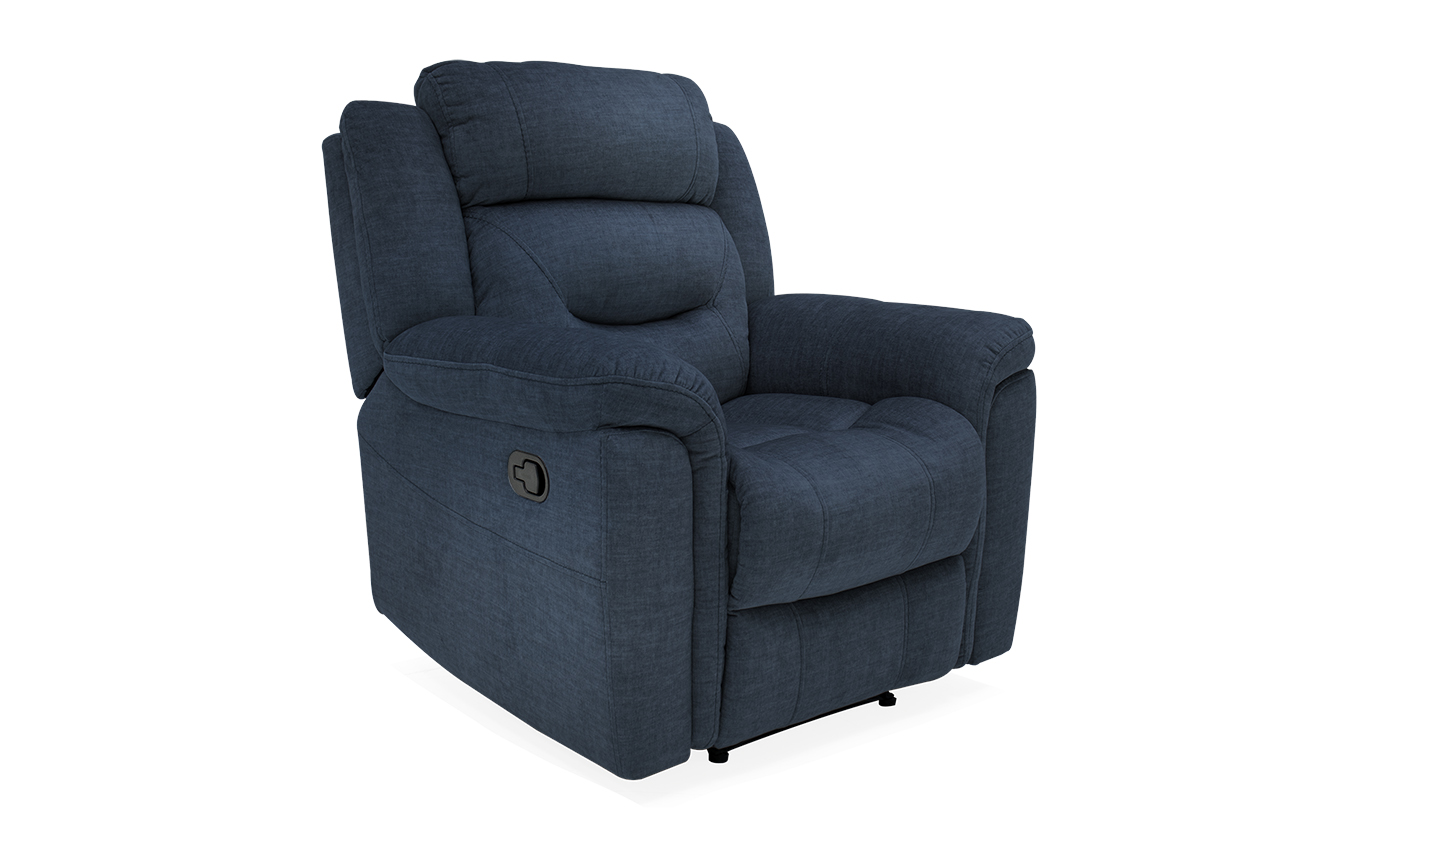 Dudley Blue 1 Seater Recliner